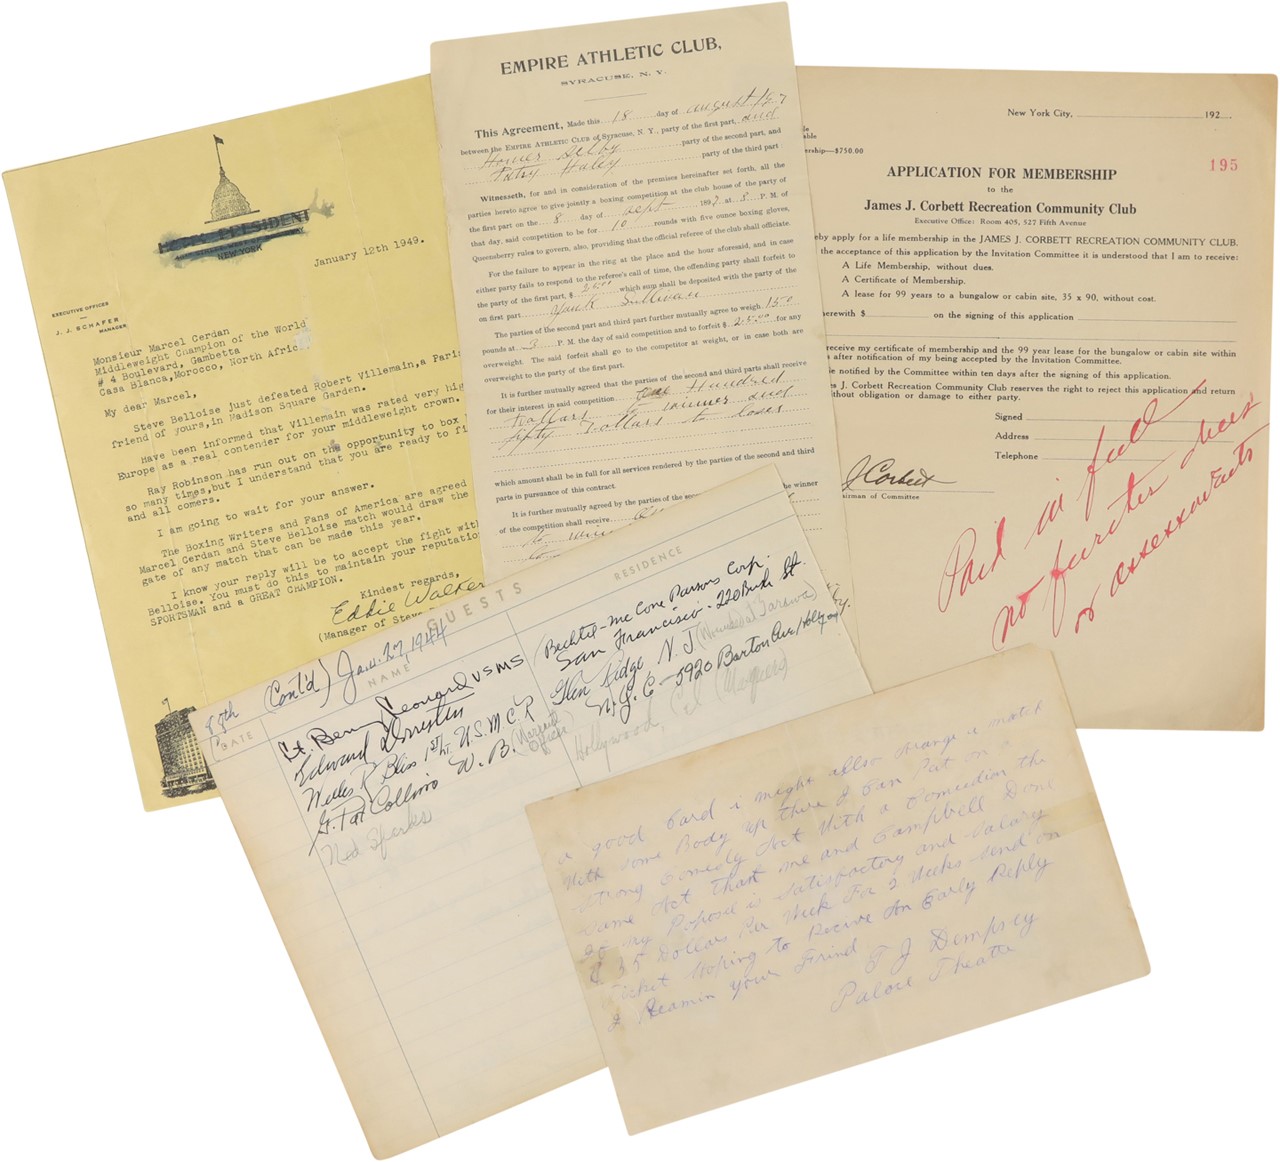 Muhammad Ali & Boxing - Collection of 19th-20th Century Boxing Letters & Autographs (25)